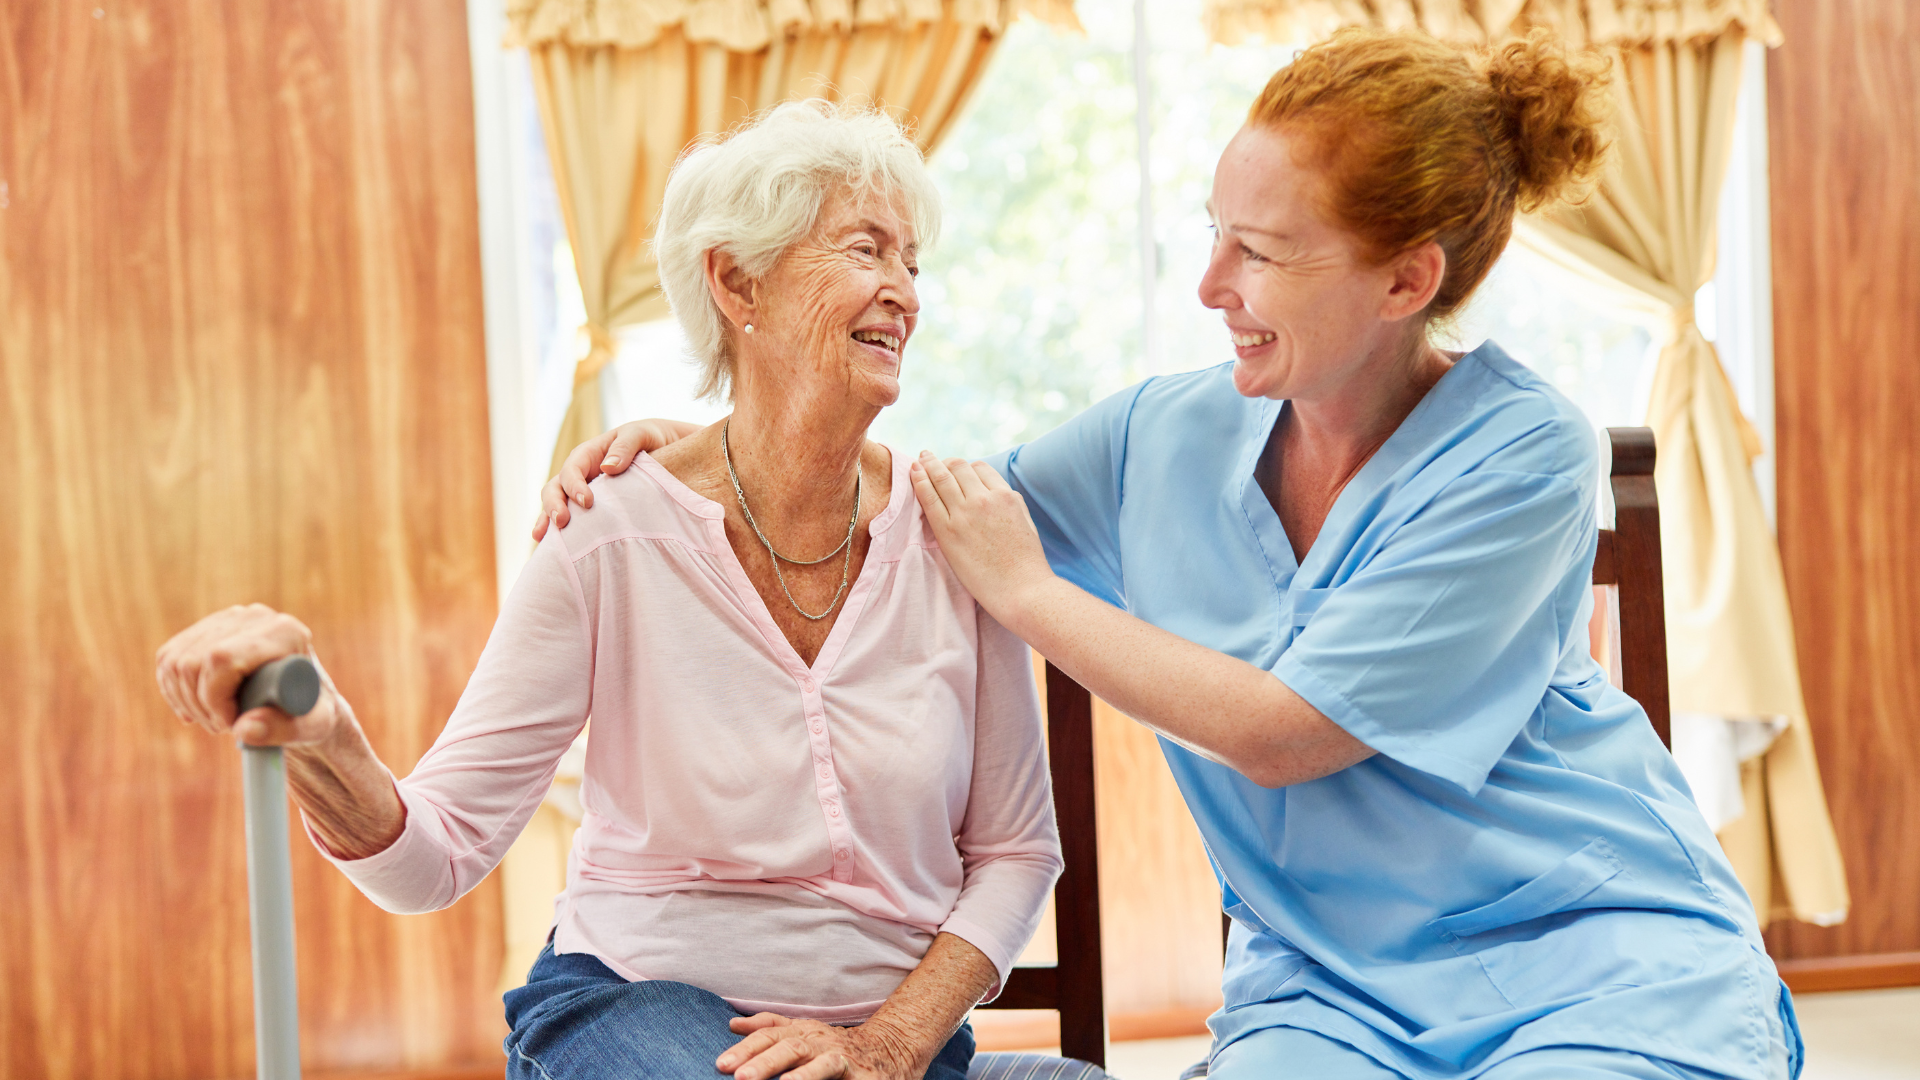 Smiling homecare provider sitting next to happy elderly woman